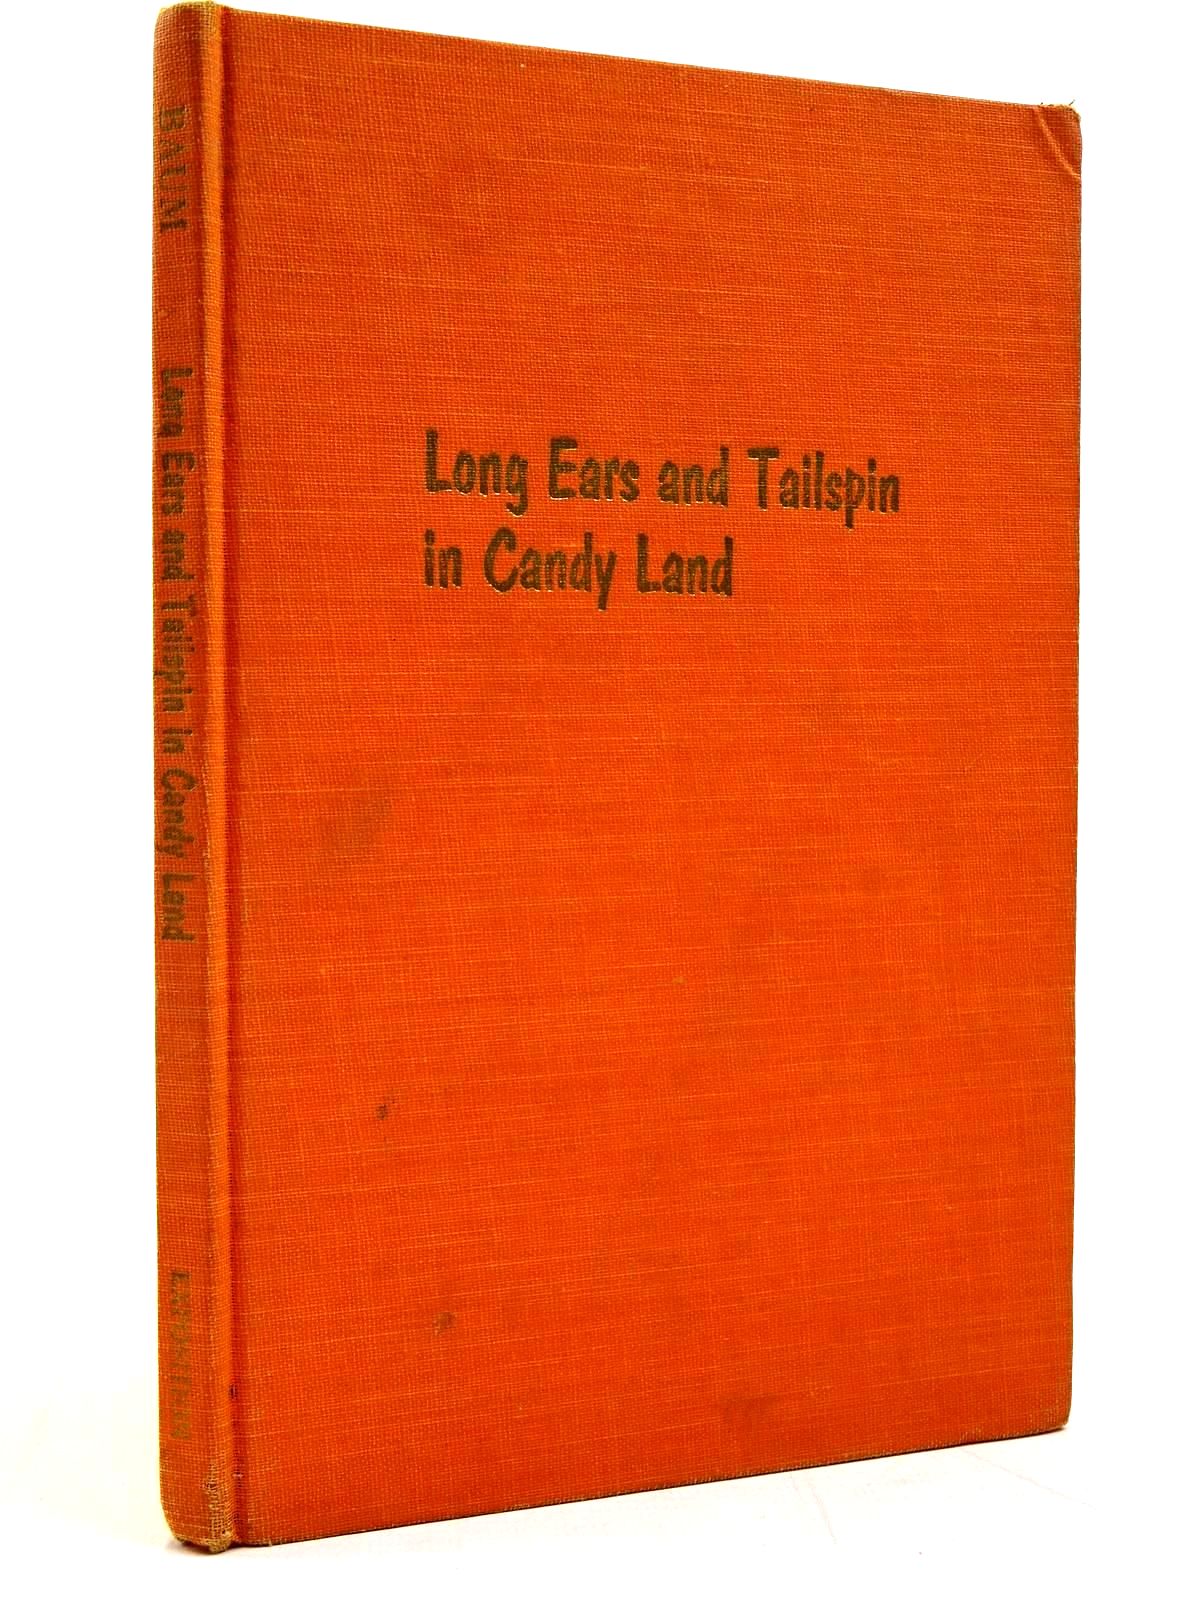 Photo of LONG EARS AND TAILSPIN IN CANDY LAND written by Baum, Roger S. illustrated by Farmer, Mary Ann published by Exposition Press (STOCK CODE: 2131118)  for sale by Stella & Rose's Books